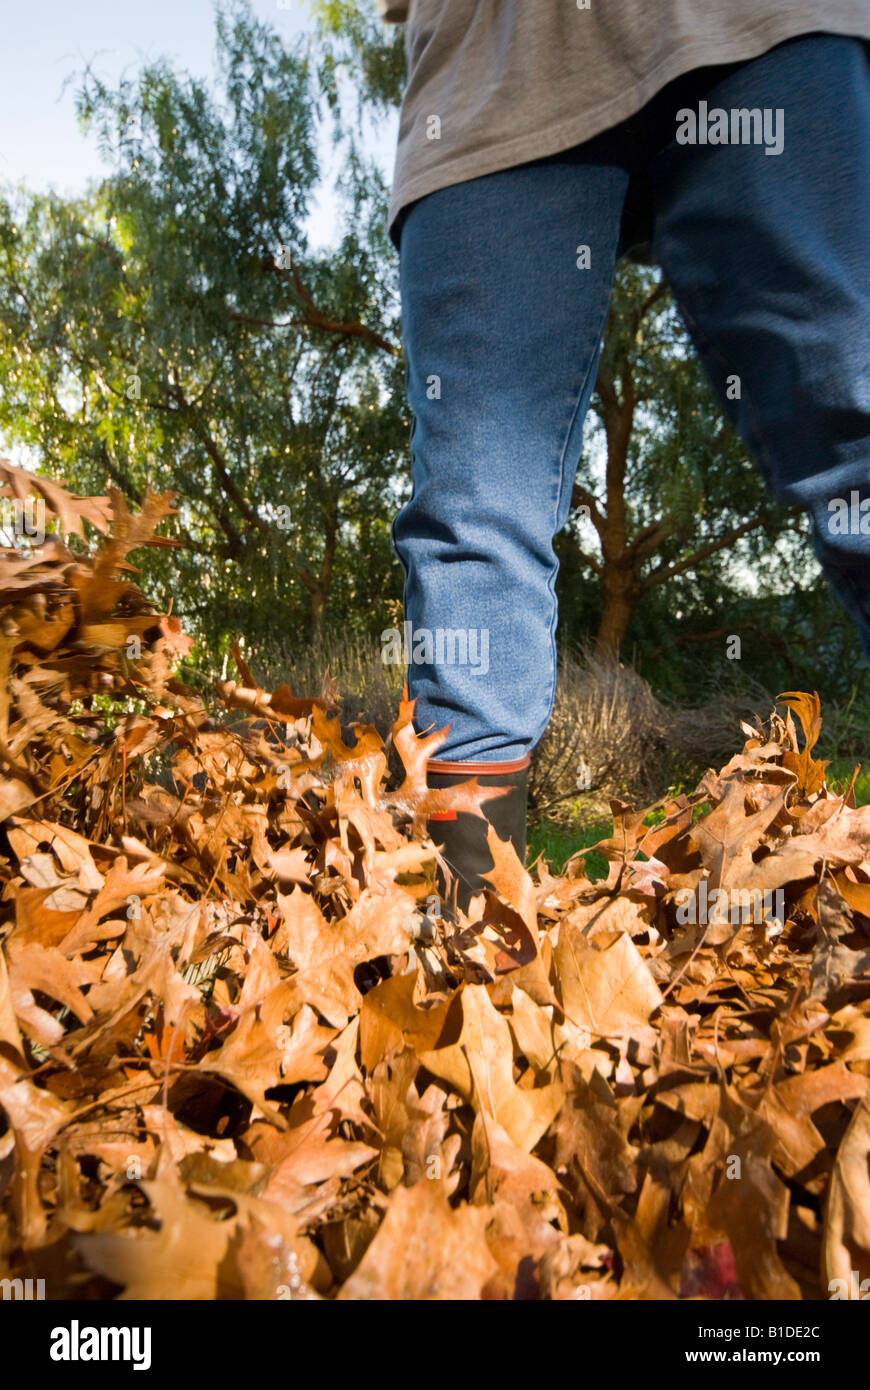 A gardener in wellington boots standing in a pile of autumn leaves Stock Photo